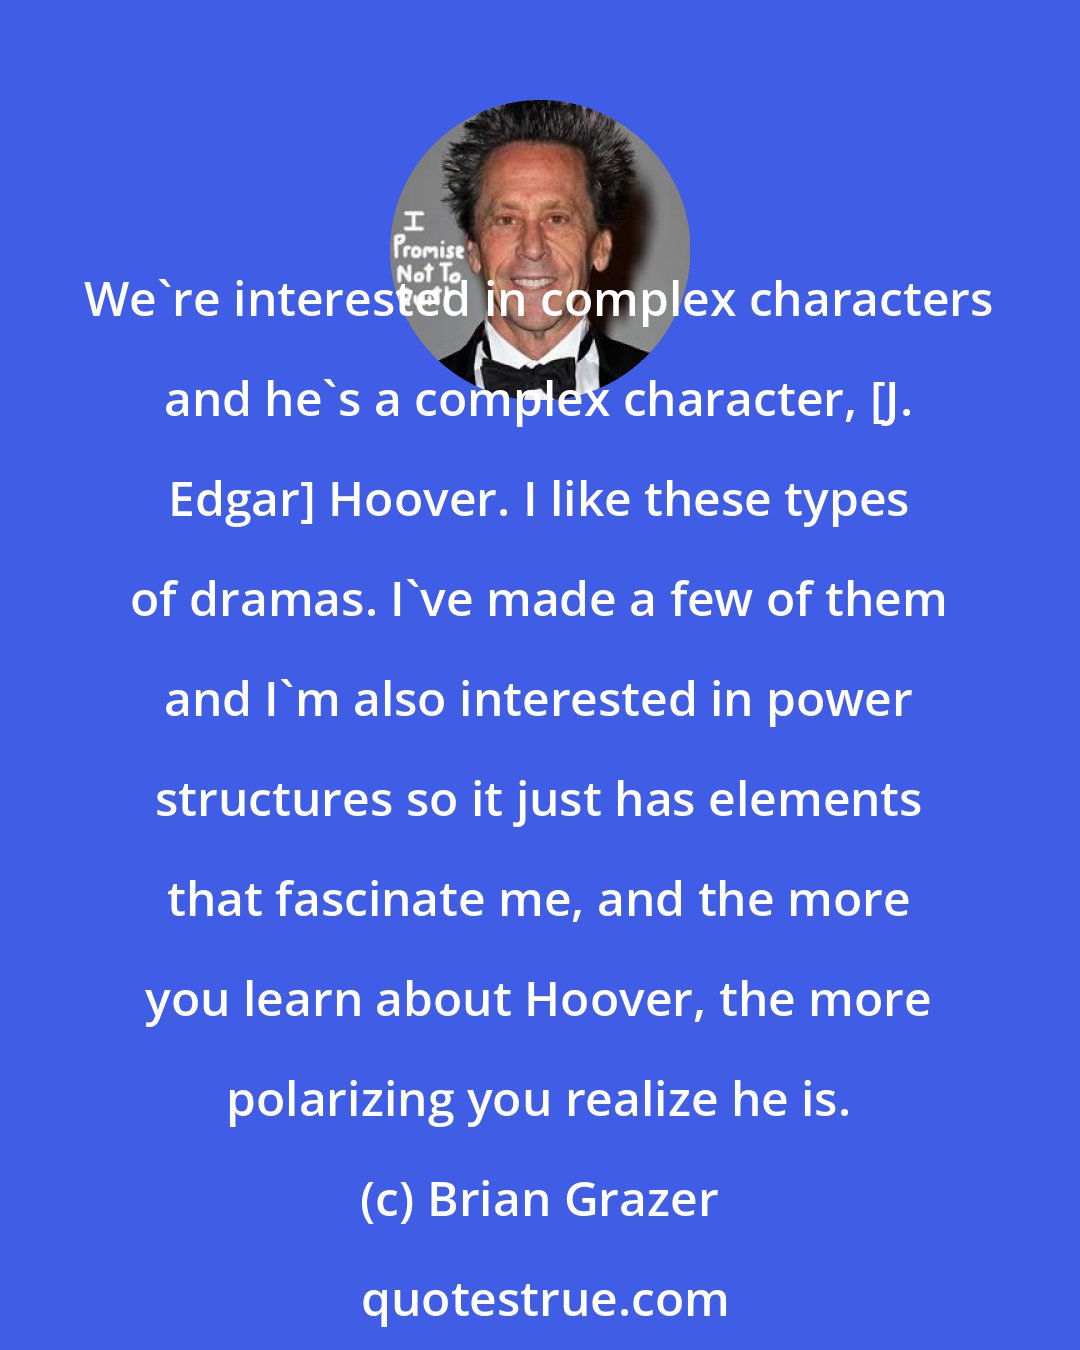 Brian Grazer: We're interested in complex characters and he's a complex character, [J. Edgar] Hoover. I like these types of dramas. I've made a few of them and I'm also interested in power structures so it just has elements that fascinate me, and the more you learn about Hoover, the more polarizing you realize he is.